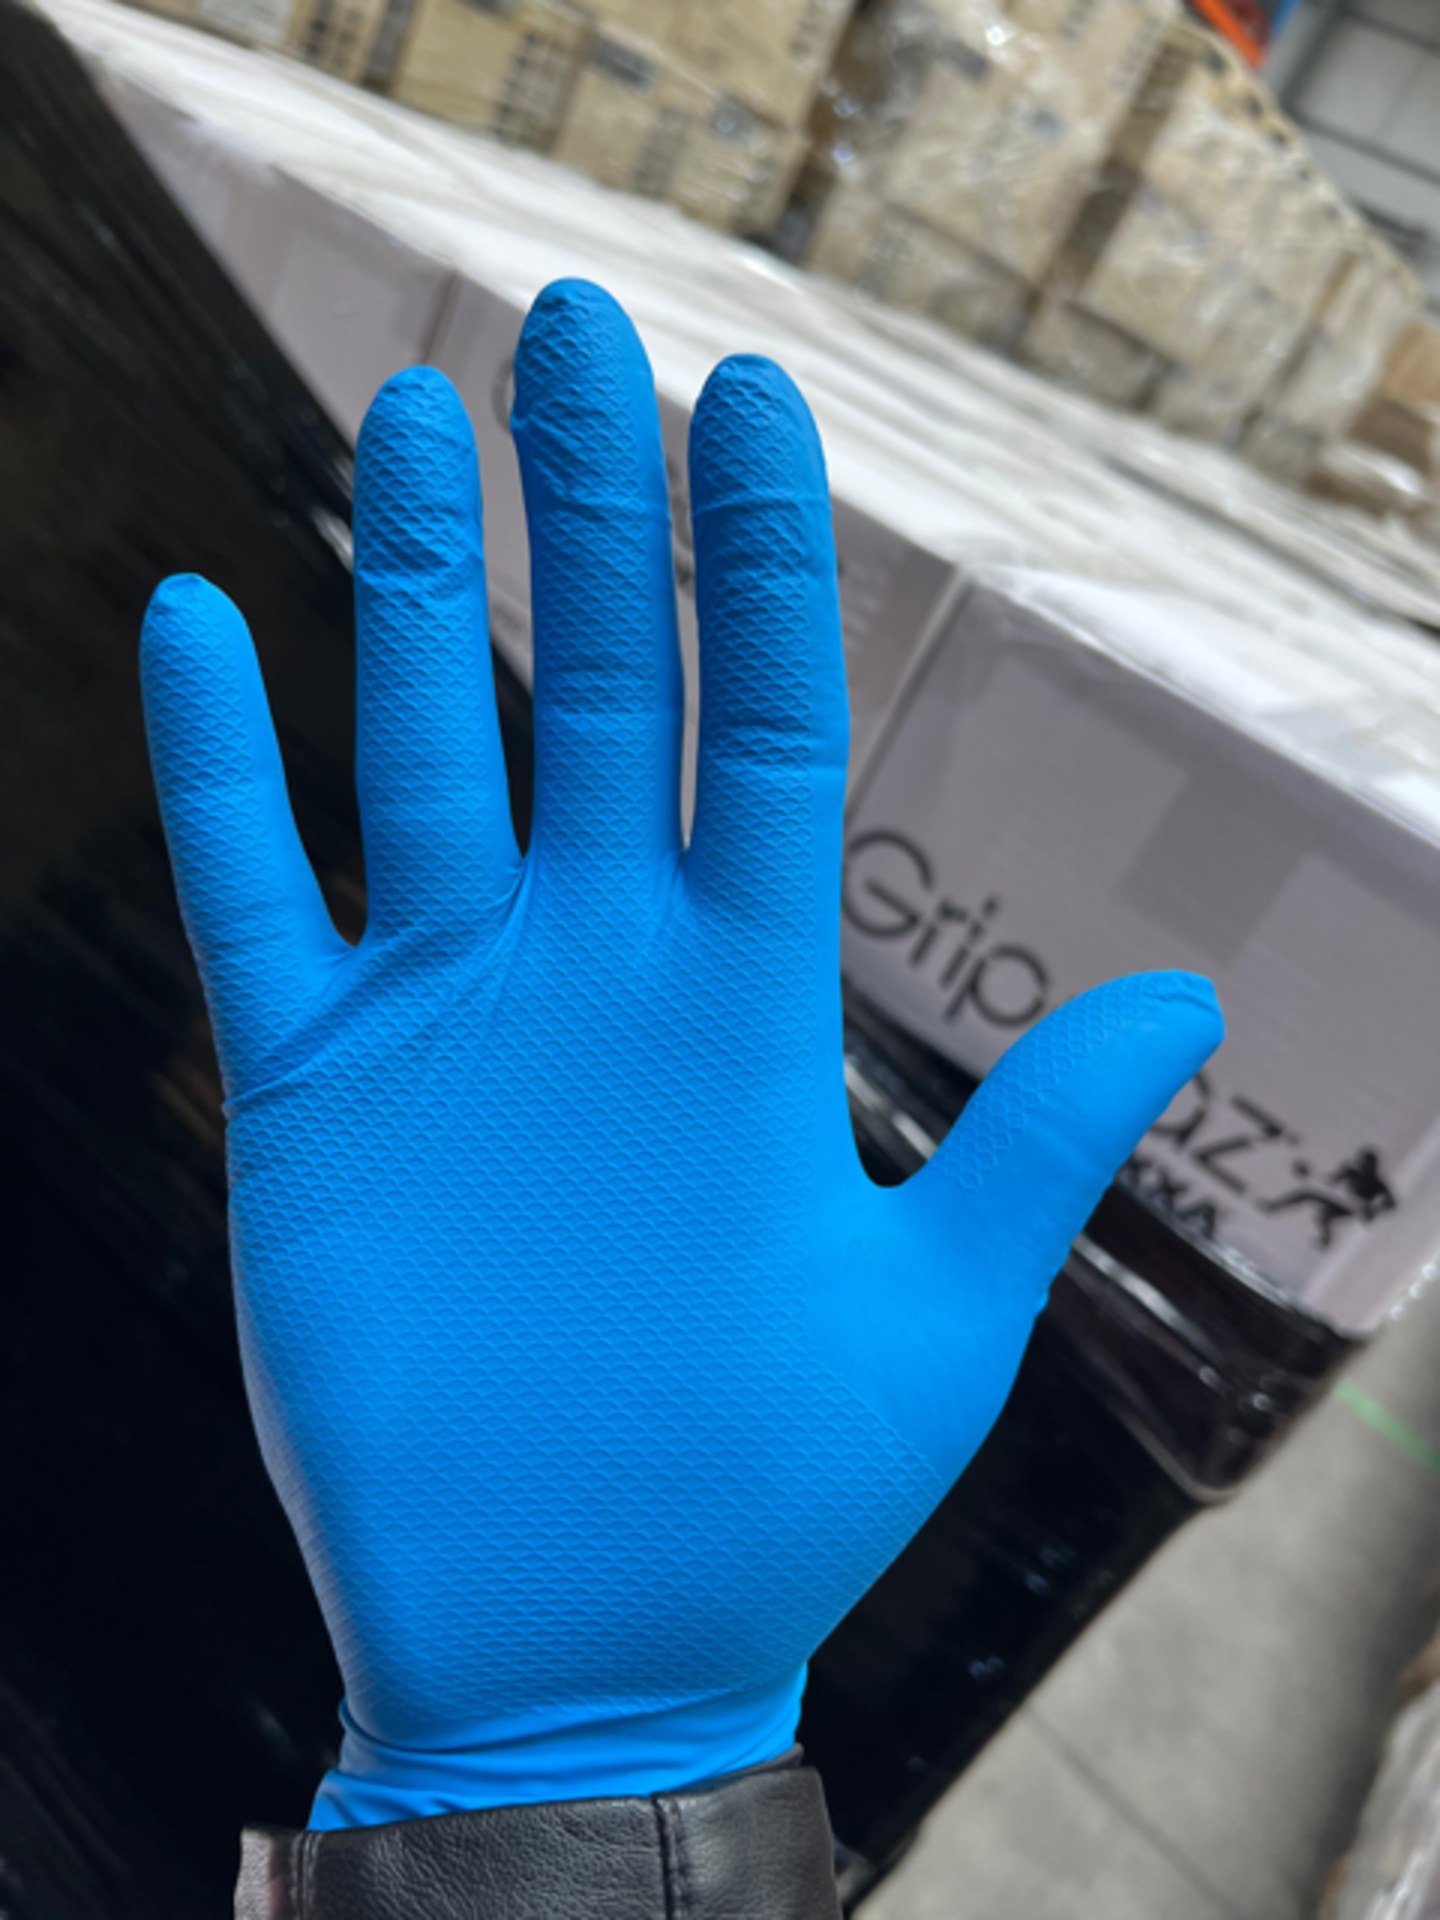 600 X BRAND NEW PACKS OF 50 GRIPPAZ Z PRO BLUE SANITISING EXAMINATION GLOVES SIZE SMALL EXP OCT - Image 5 of 5